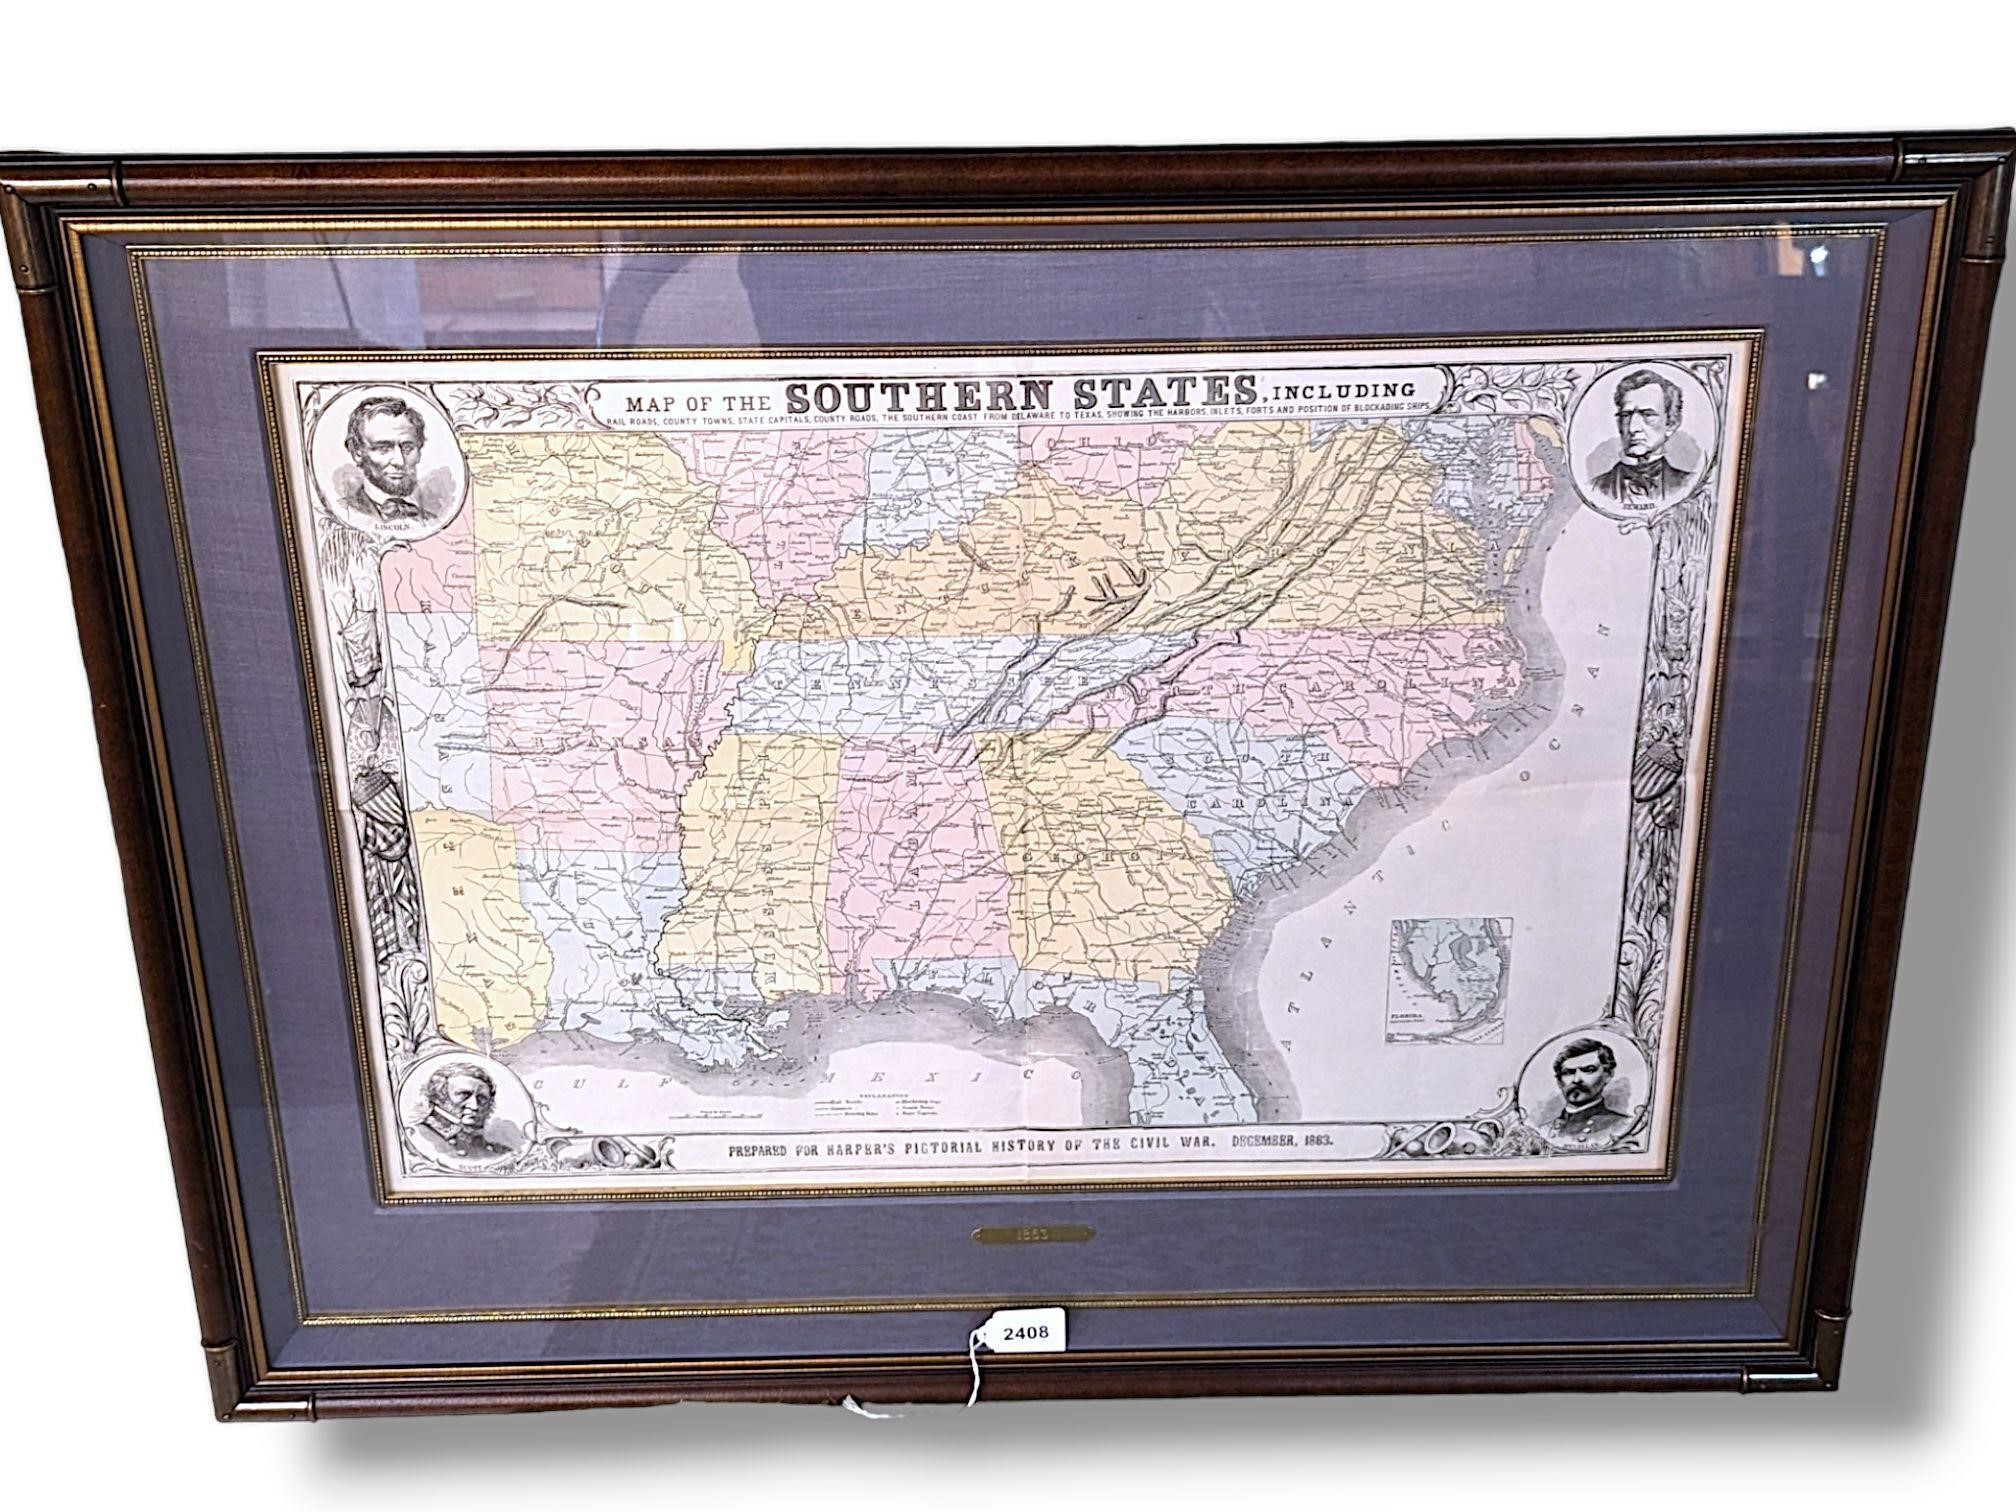 1863 Harpers Map of the Southern States Civil war